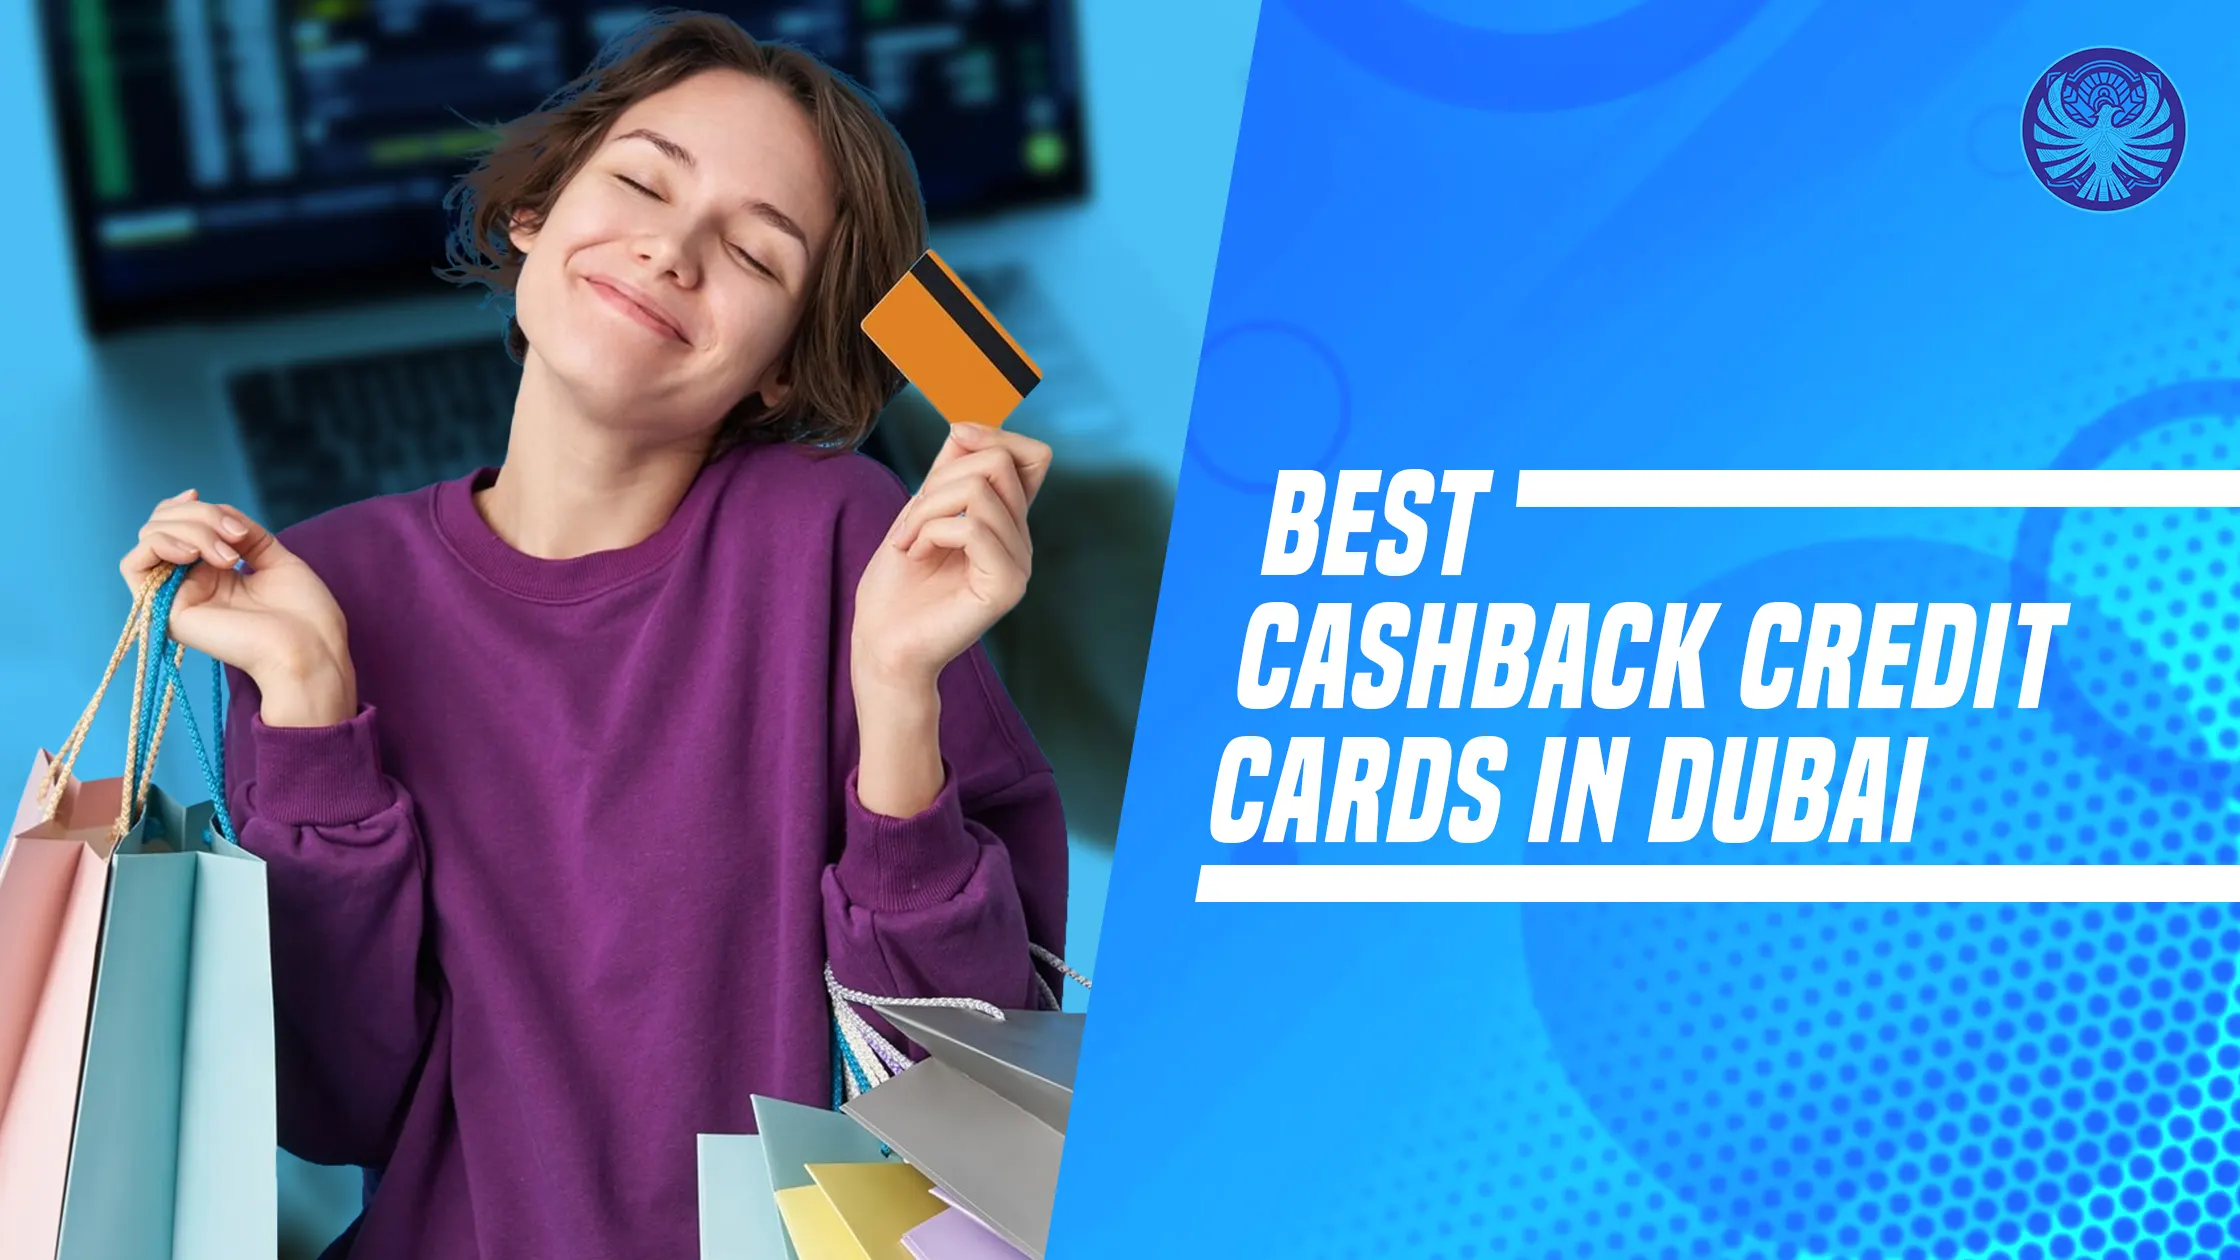 Top 10 Best Cashback Credit Cards In Dubai – Maximize Your Savings!